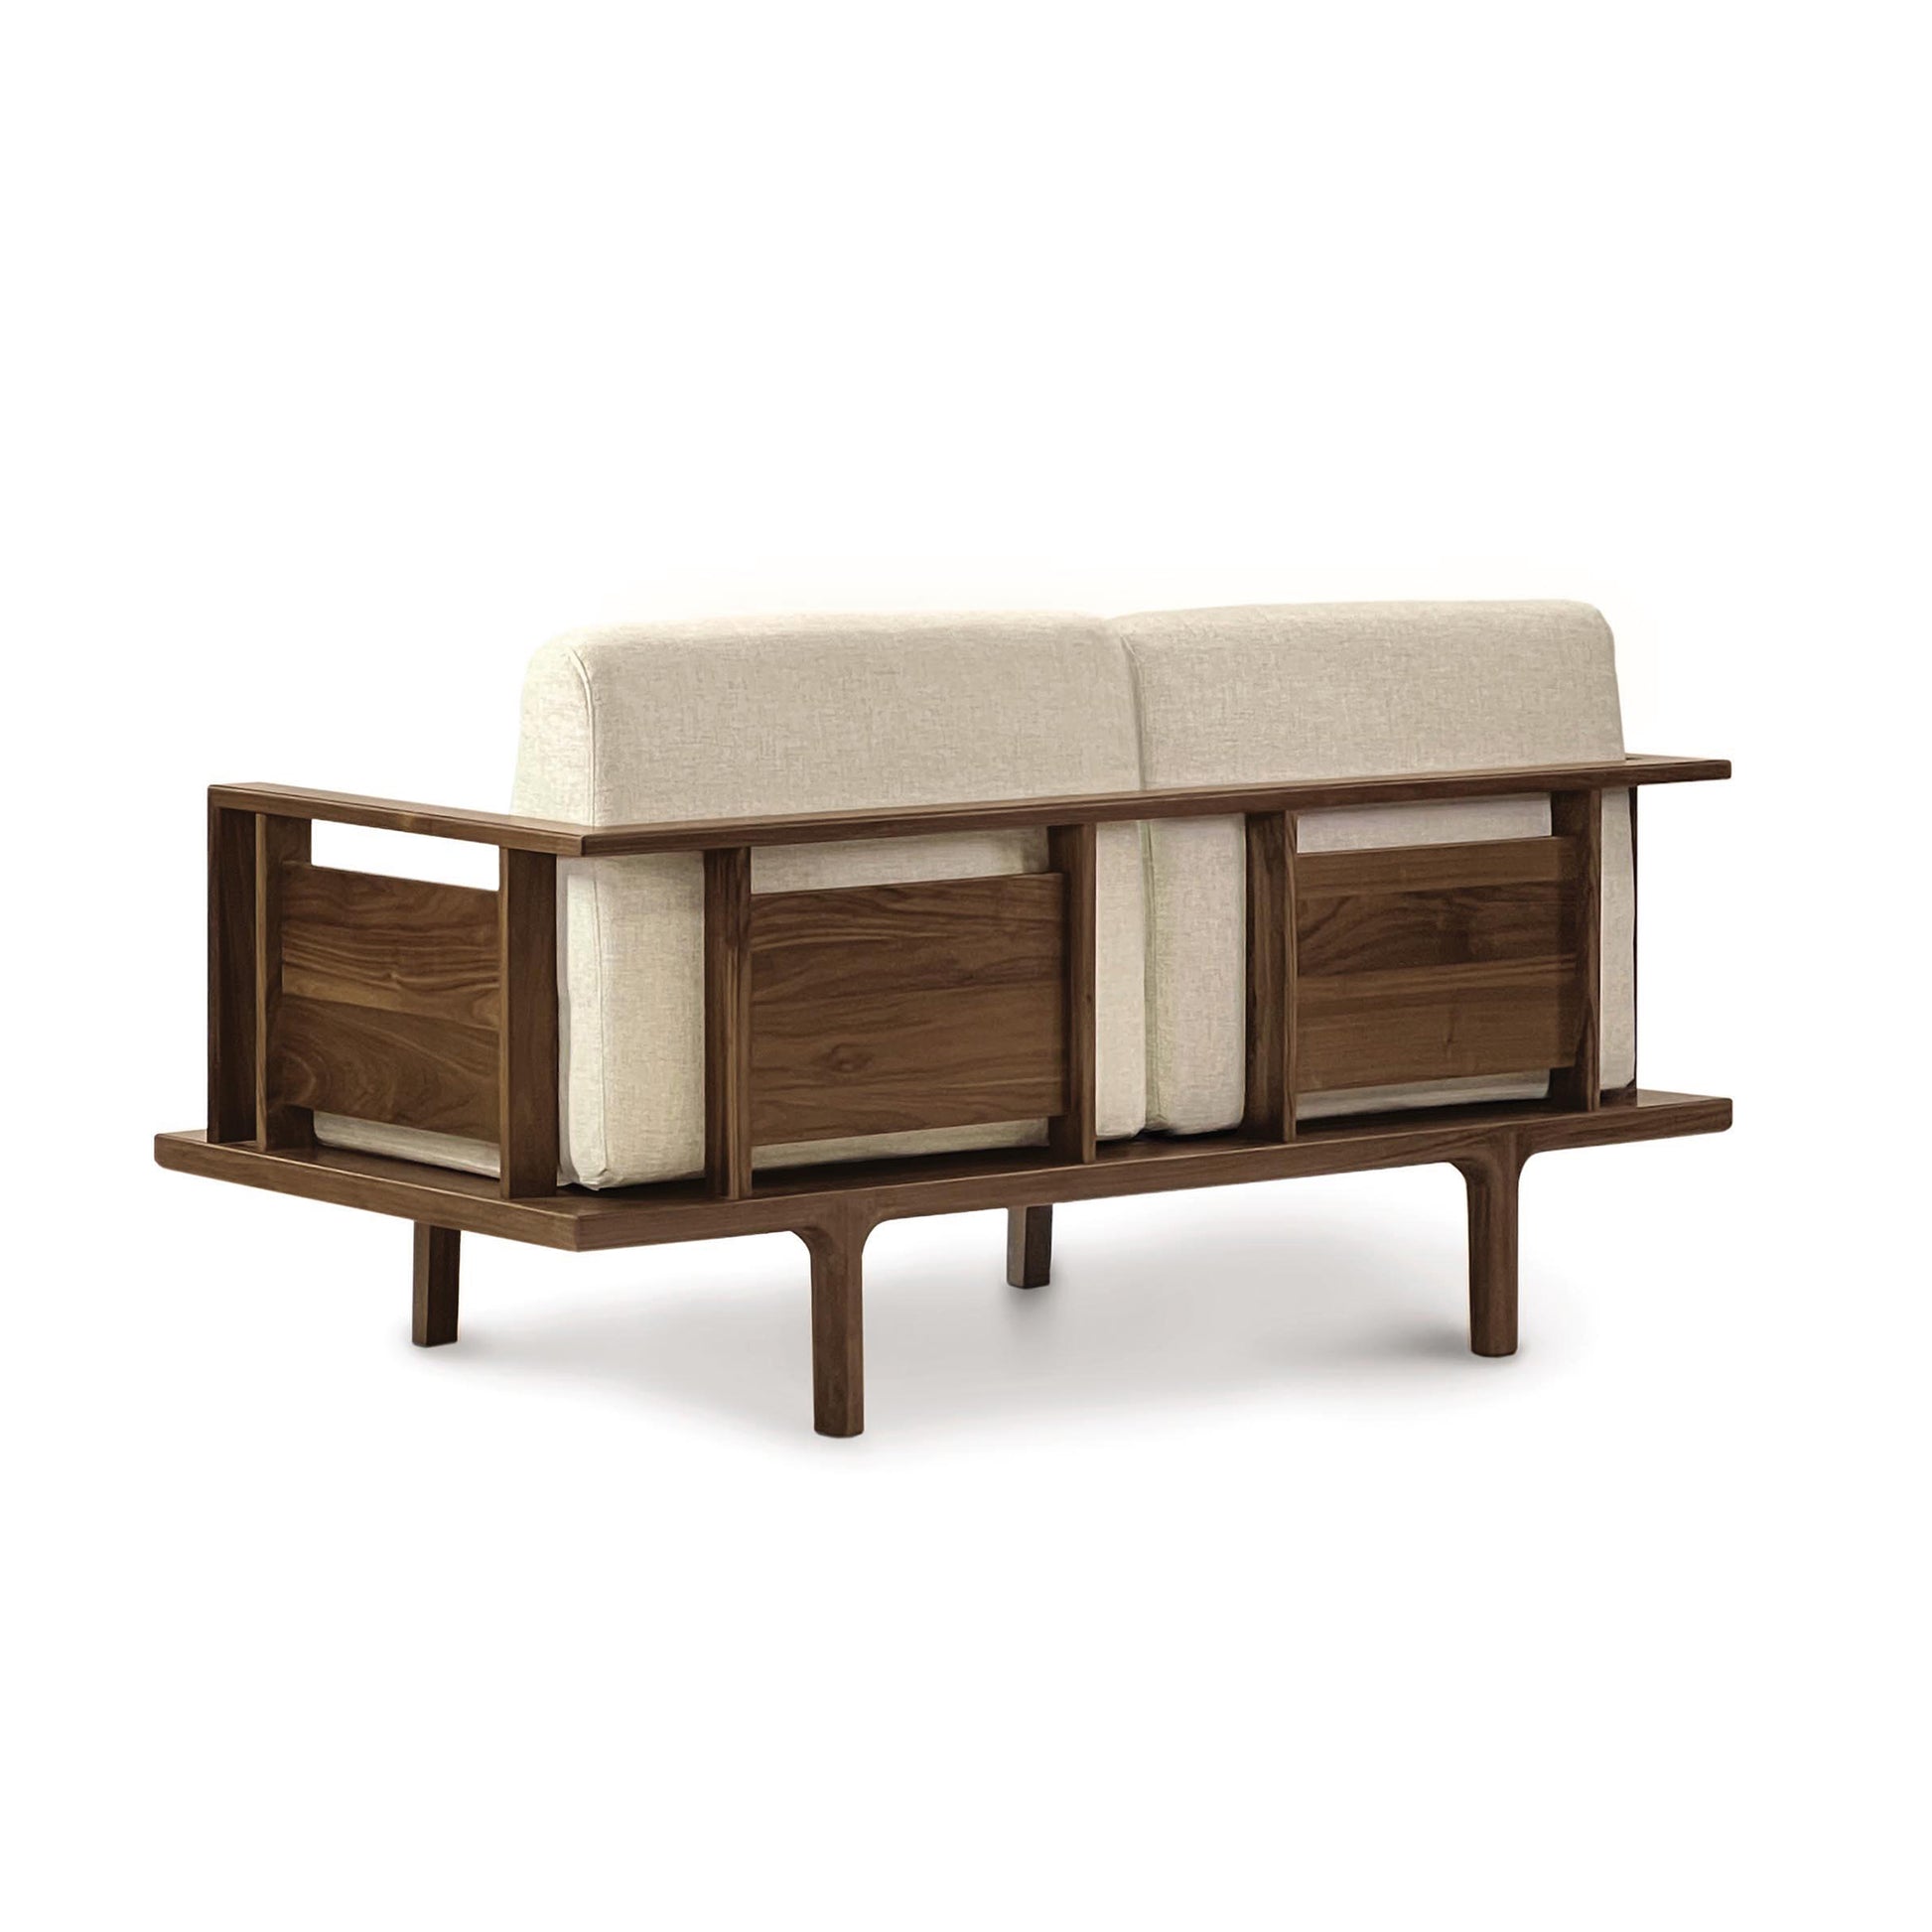 The Copeland Furniture Sierra Walnut Upholstered Loveseat showcases a contemporary design, equipped with a natural walnut frame. The elegant wooden frame beautifully complements the sleek and stylish white cushion, creating a.